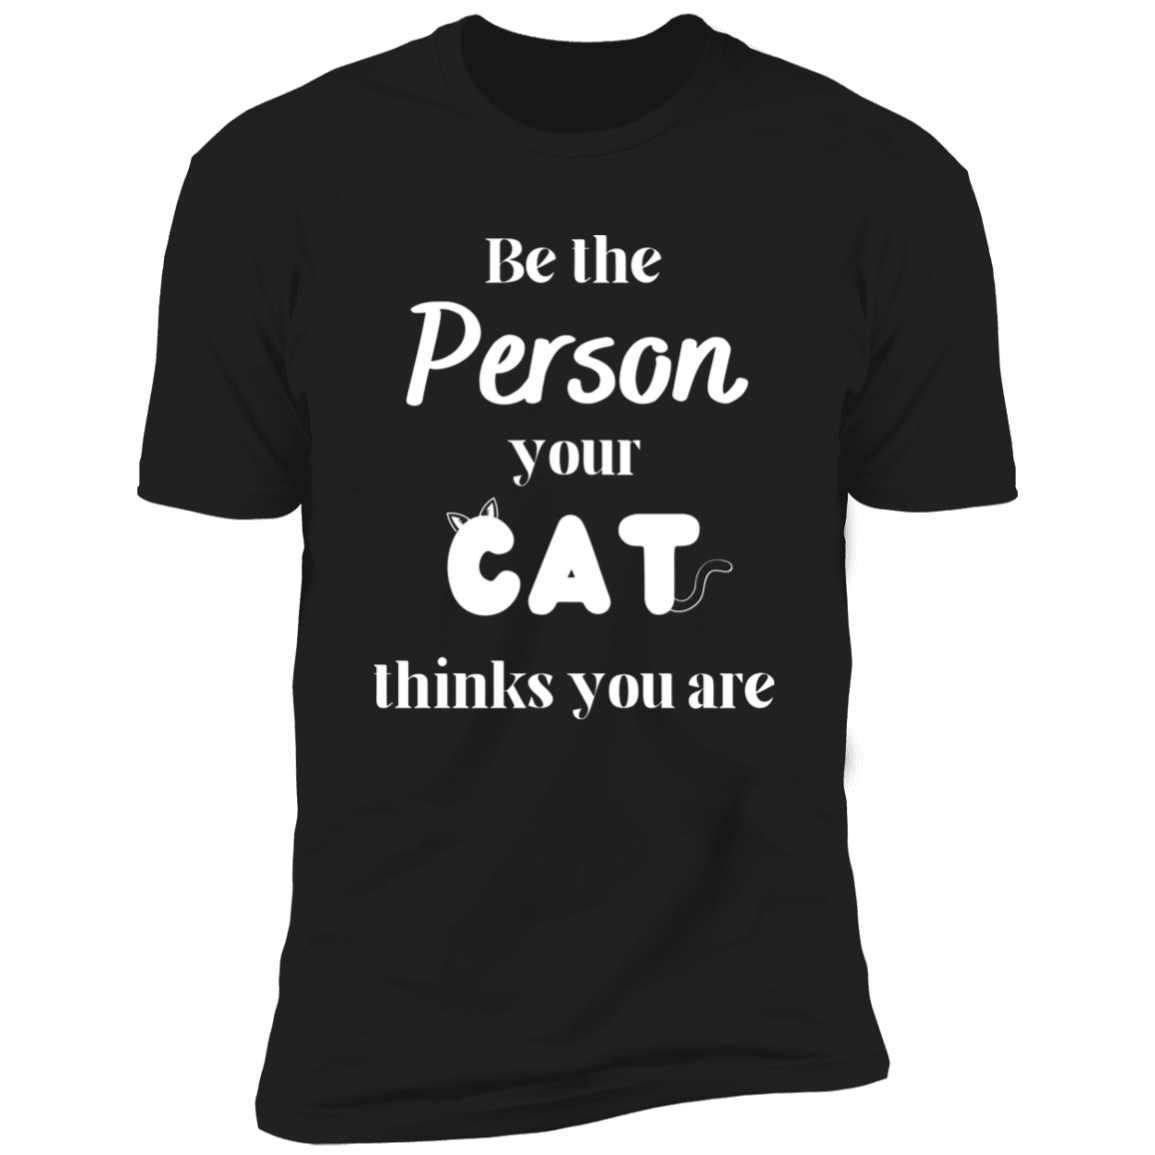 Be the Person Your Cat Thinks You Are T-shirt, Cat Shirt for humans, in black